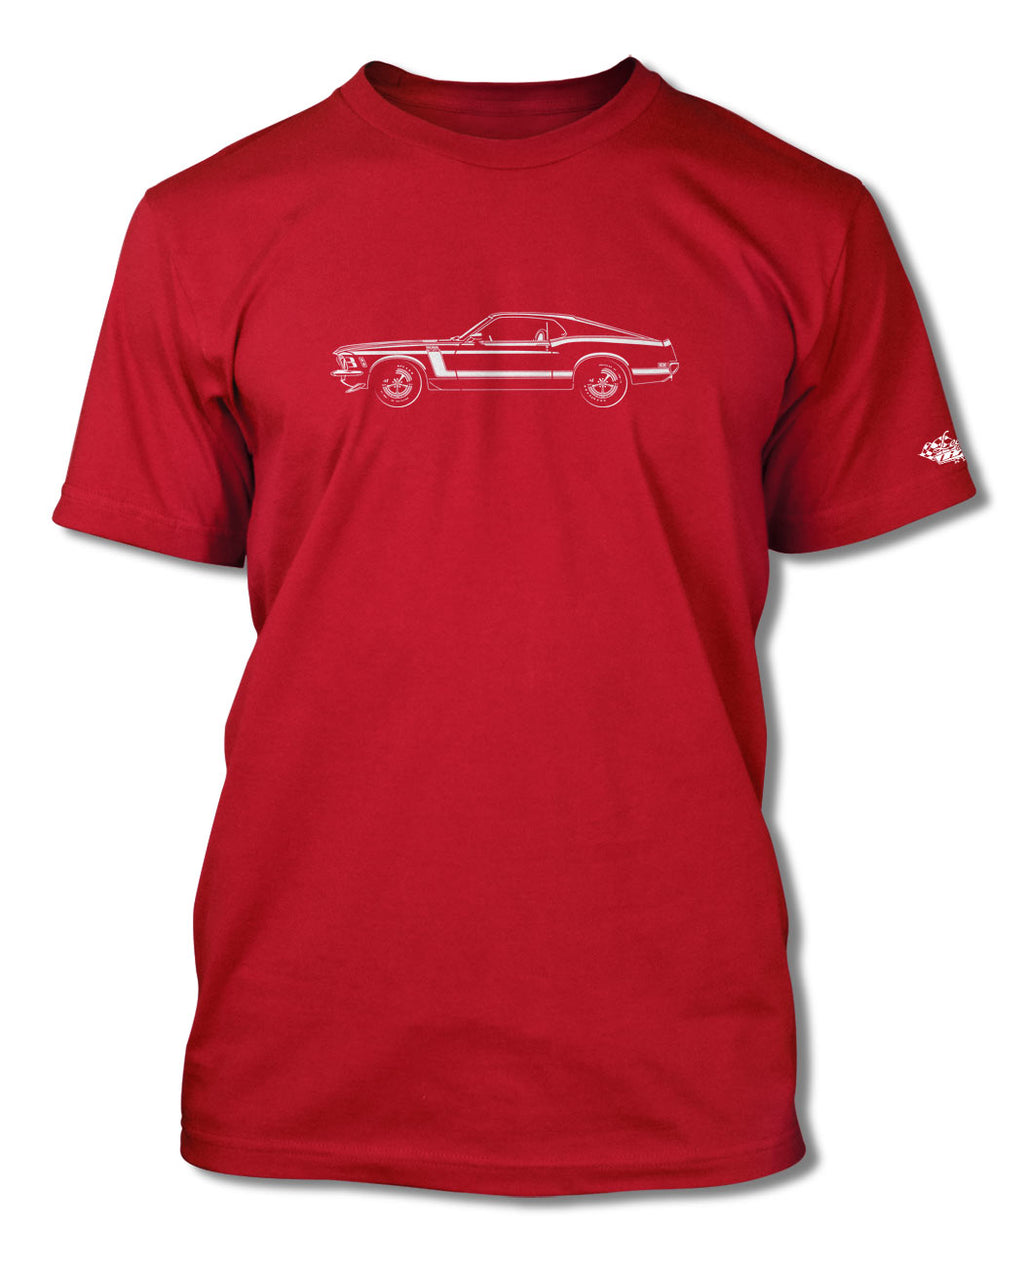 1970 Ford Mustang BOSS 302 Fastback T-Shirt - Men - Side View